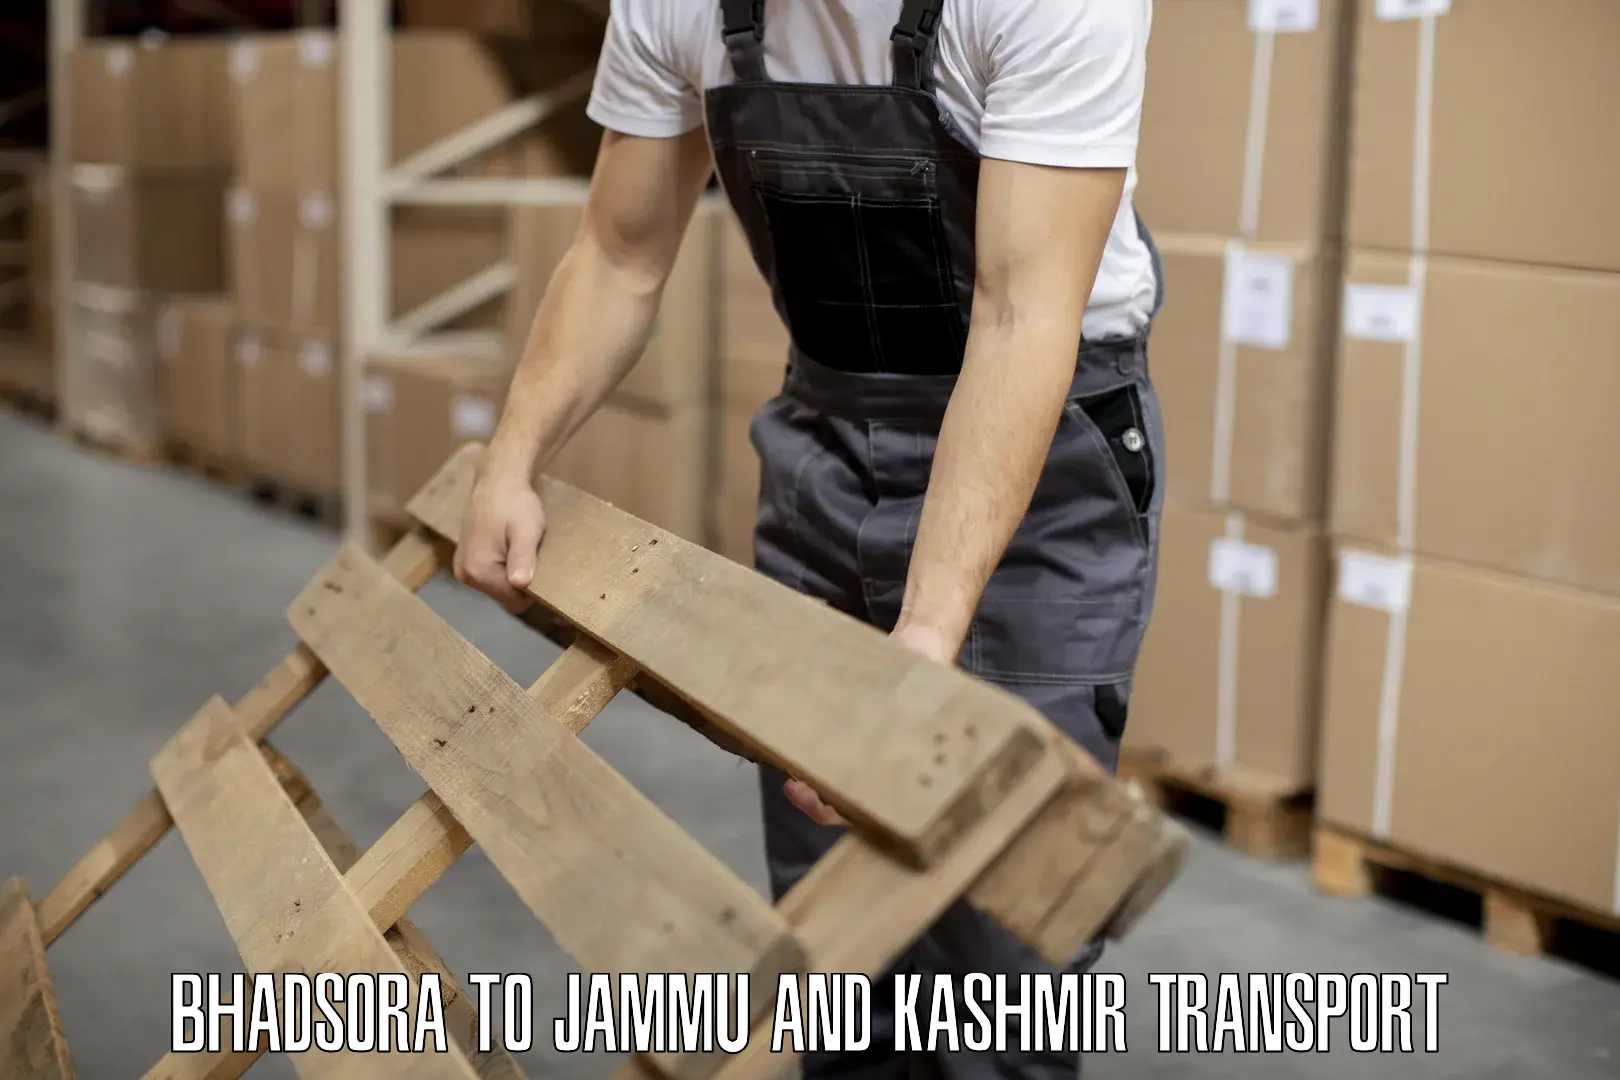 Commercial transport service Bhadsora to Shopian